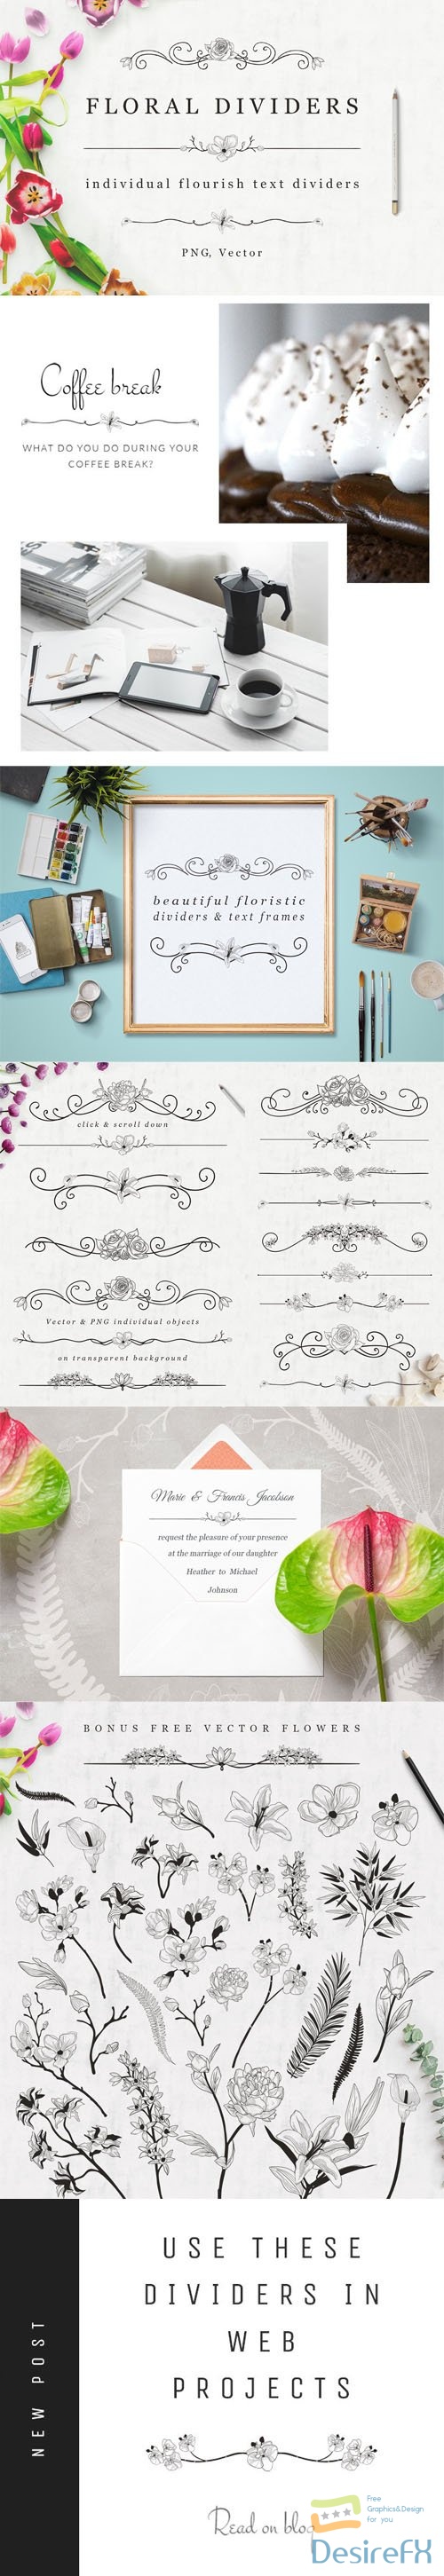 Floral Dividers - Individual Flourish Text Dividers EPS/PNG